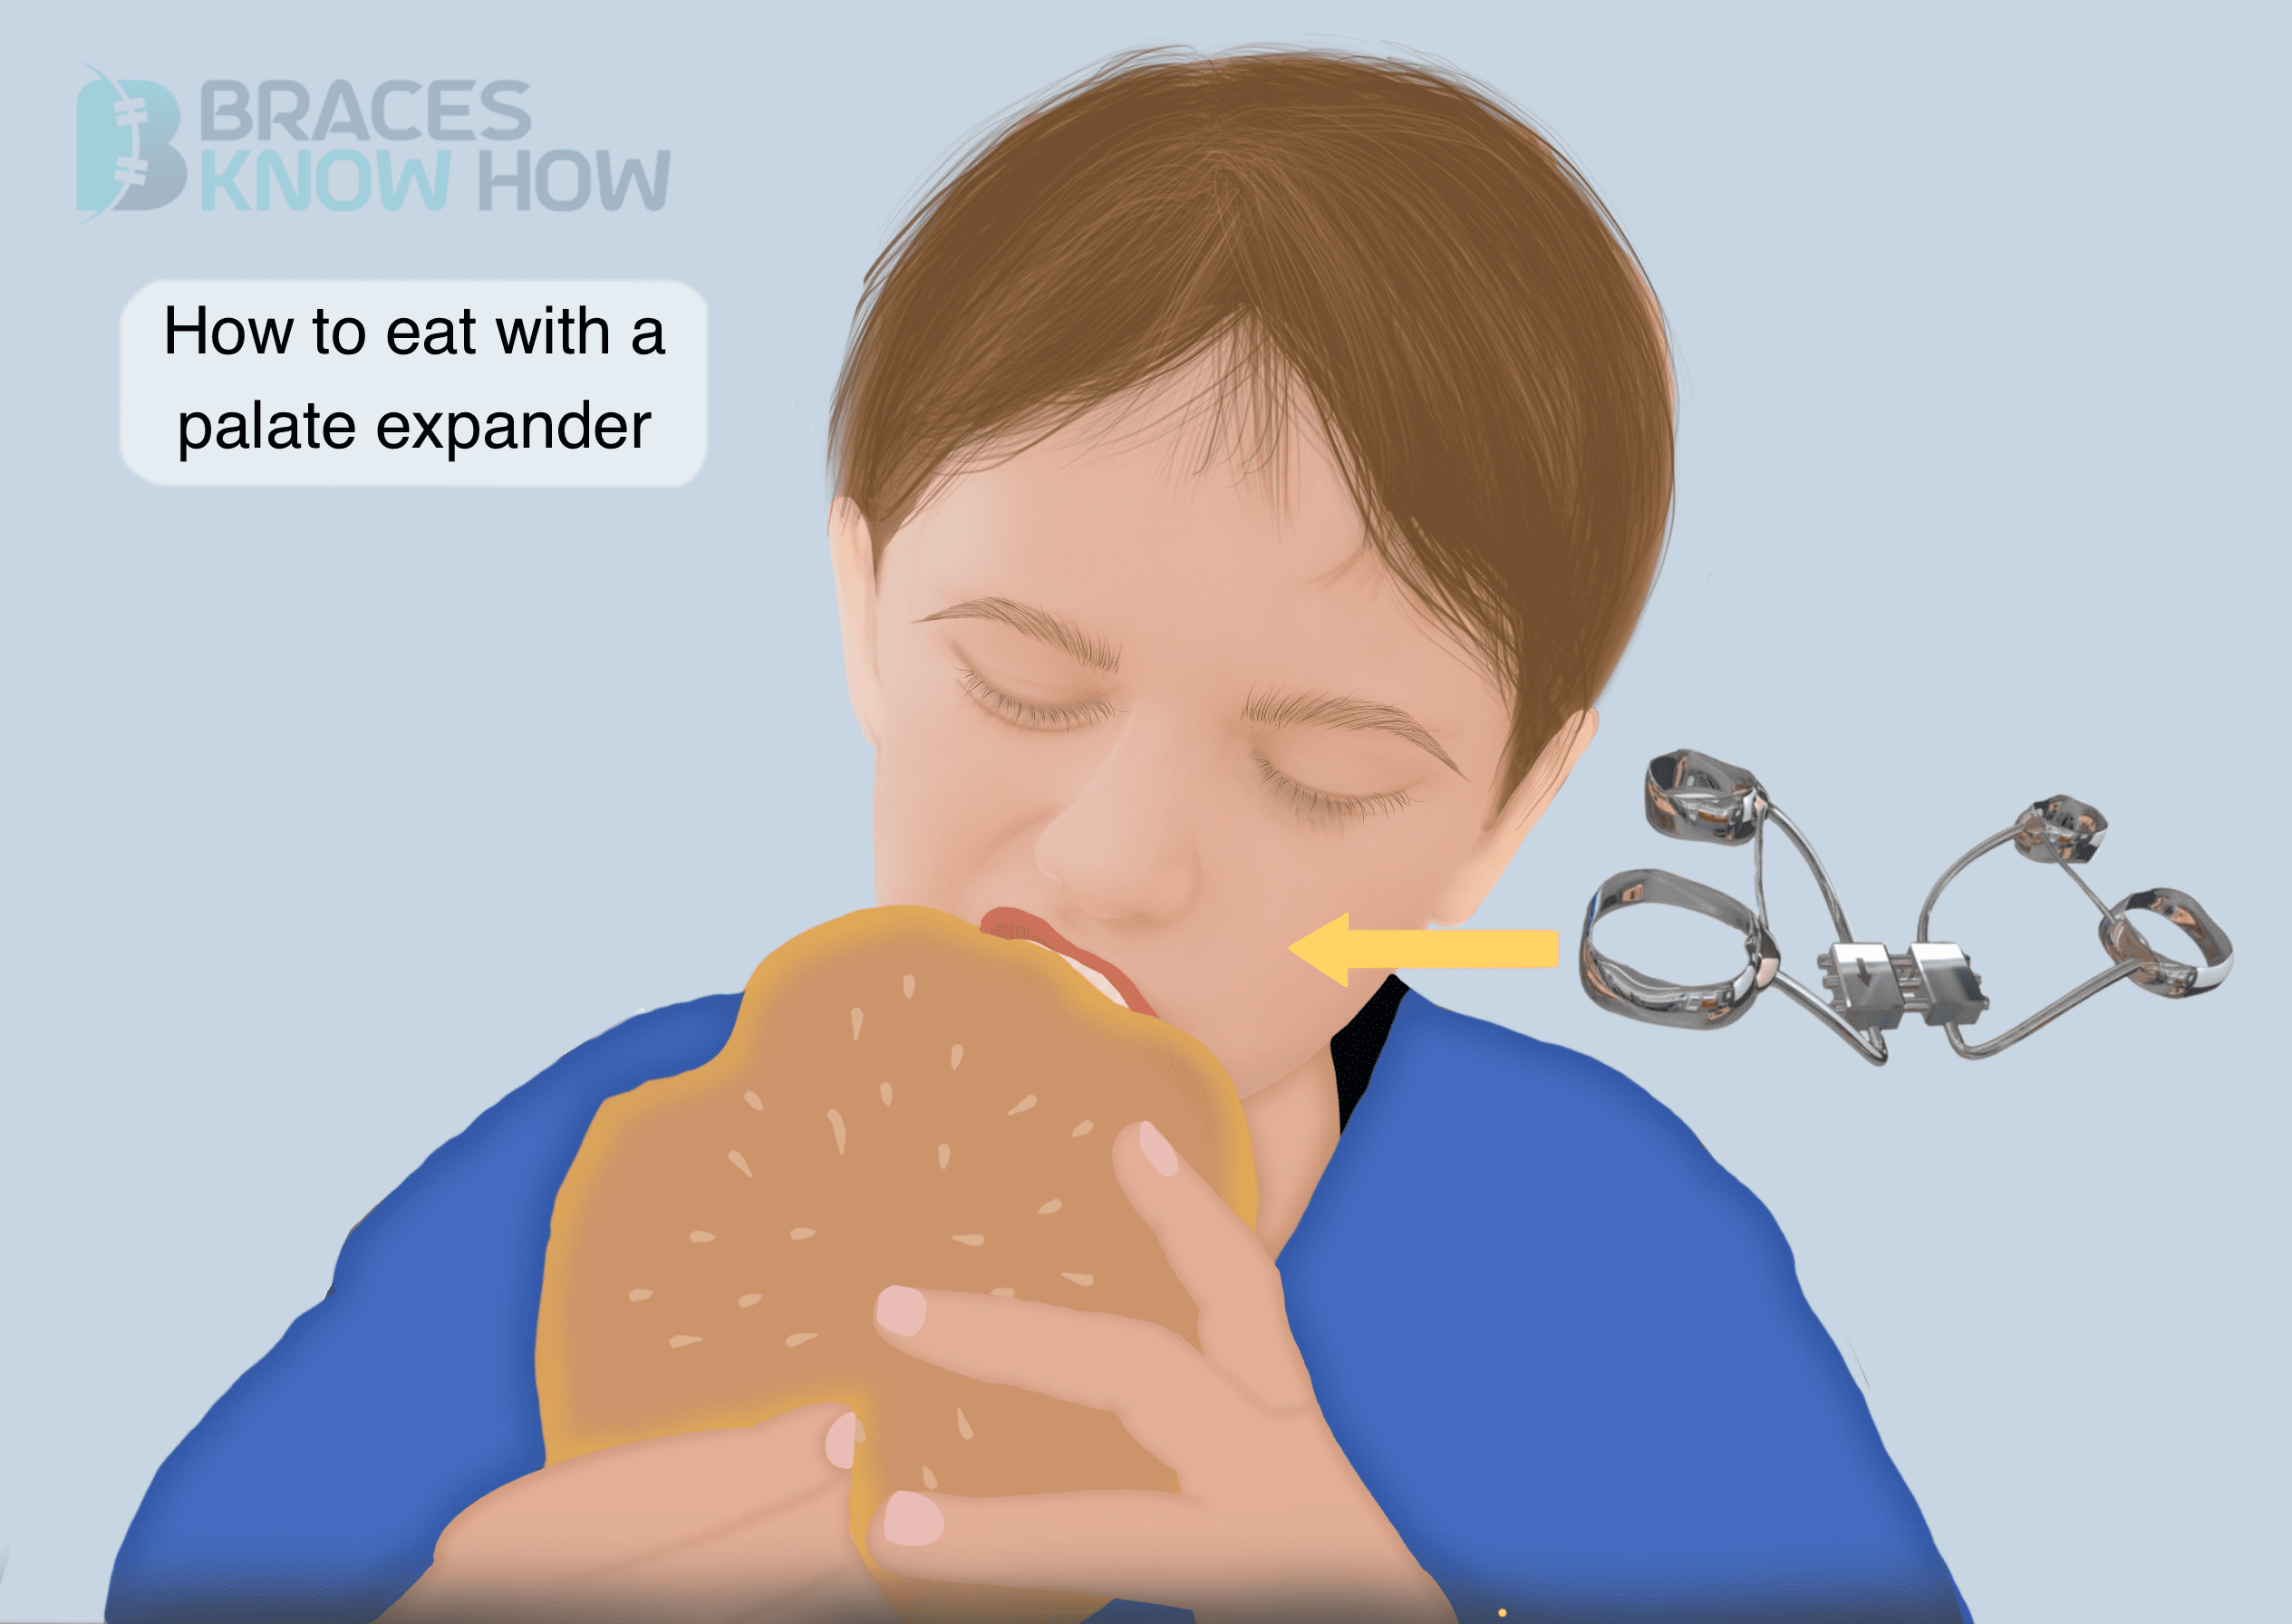 What Foods Should You Avoid While Wearing an Expander?